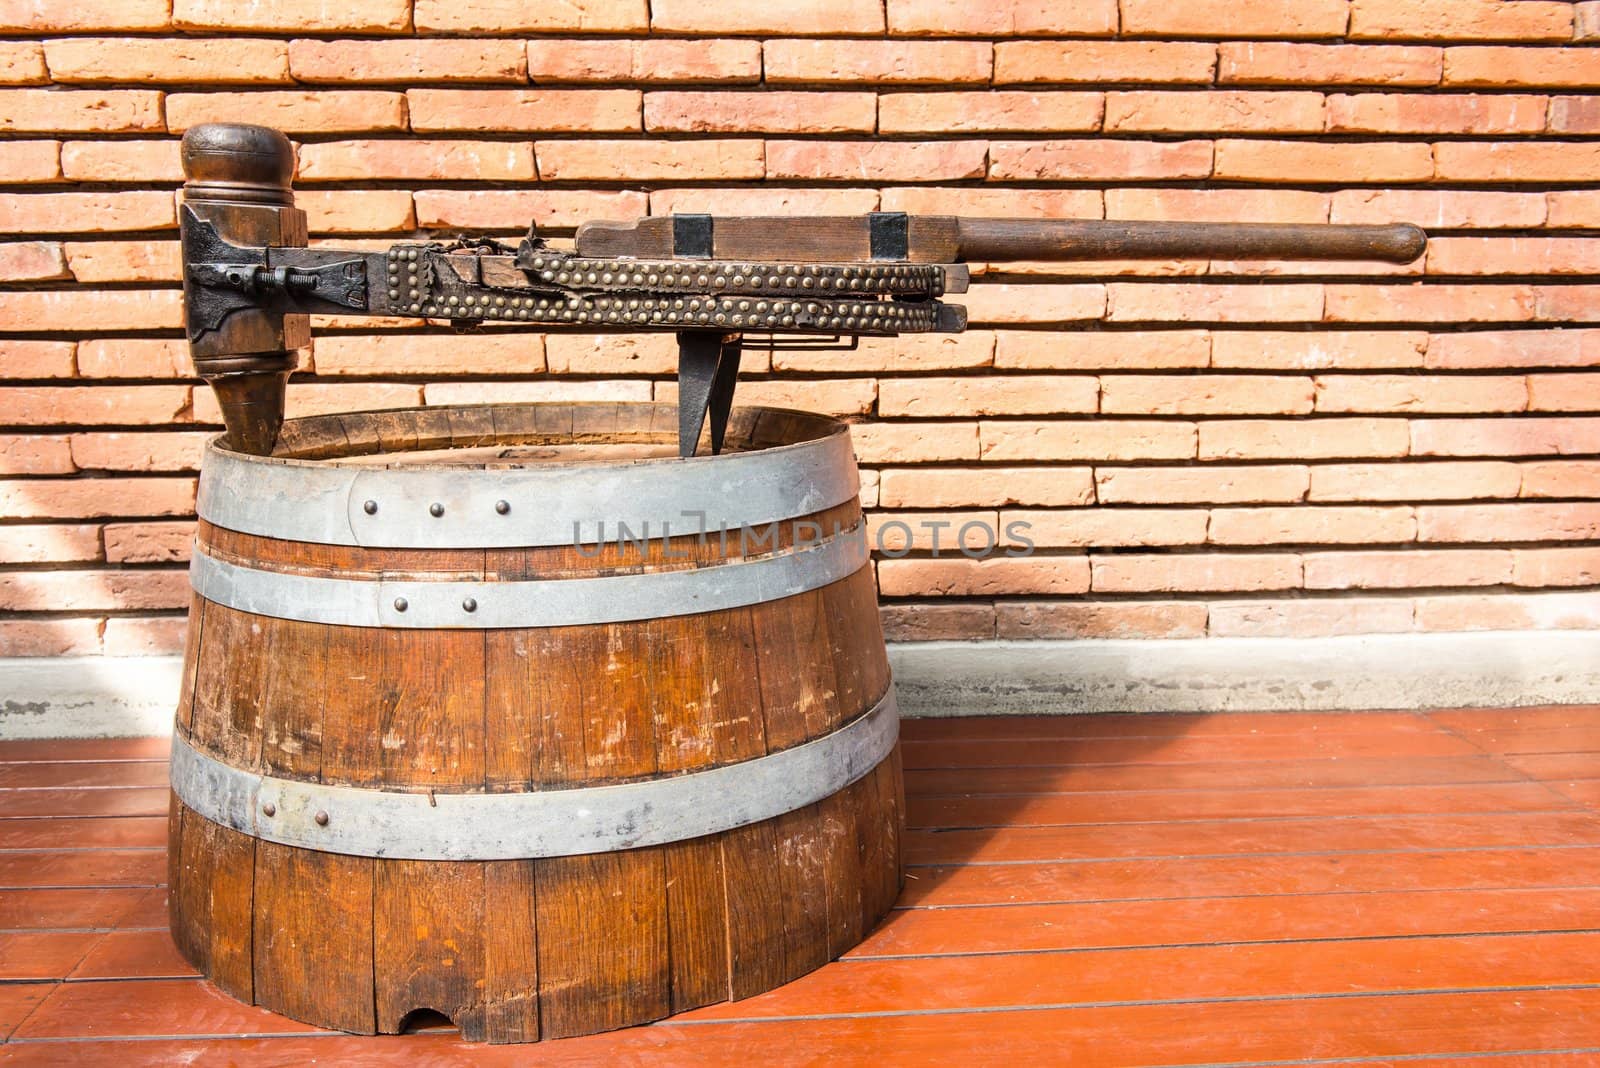 Vintage rusty steel and wooden wine bottle processing equipment, useful for background